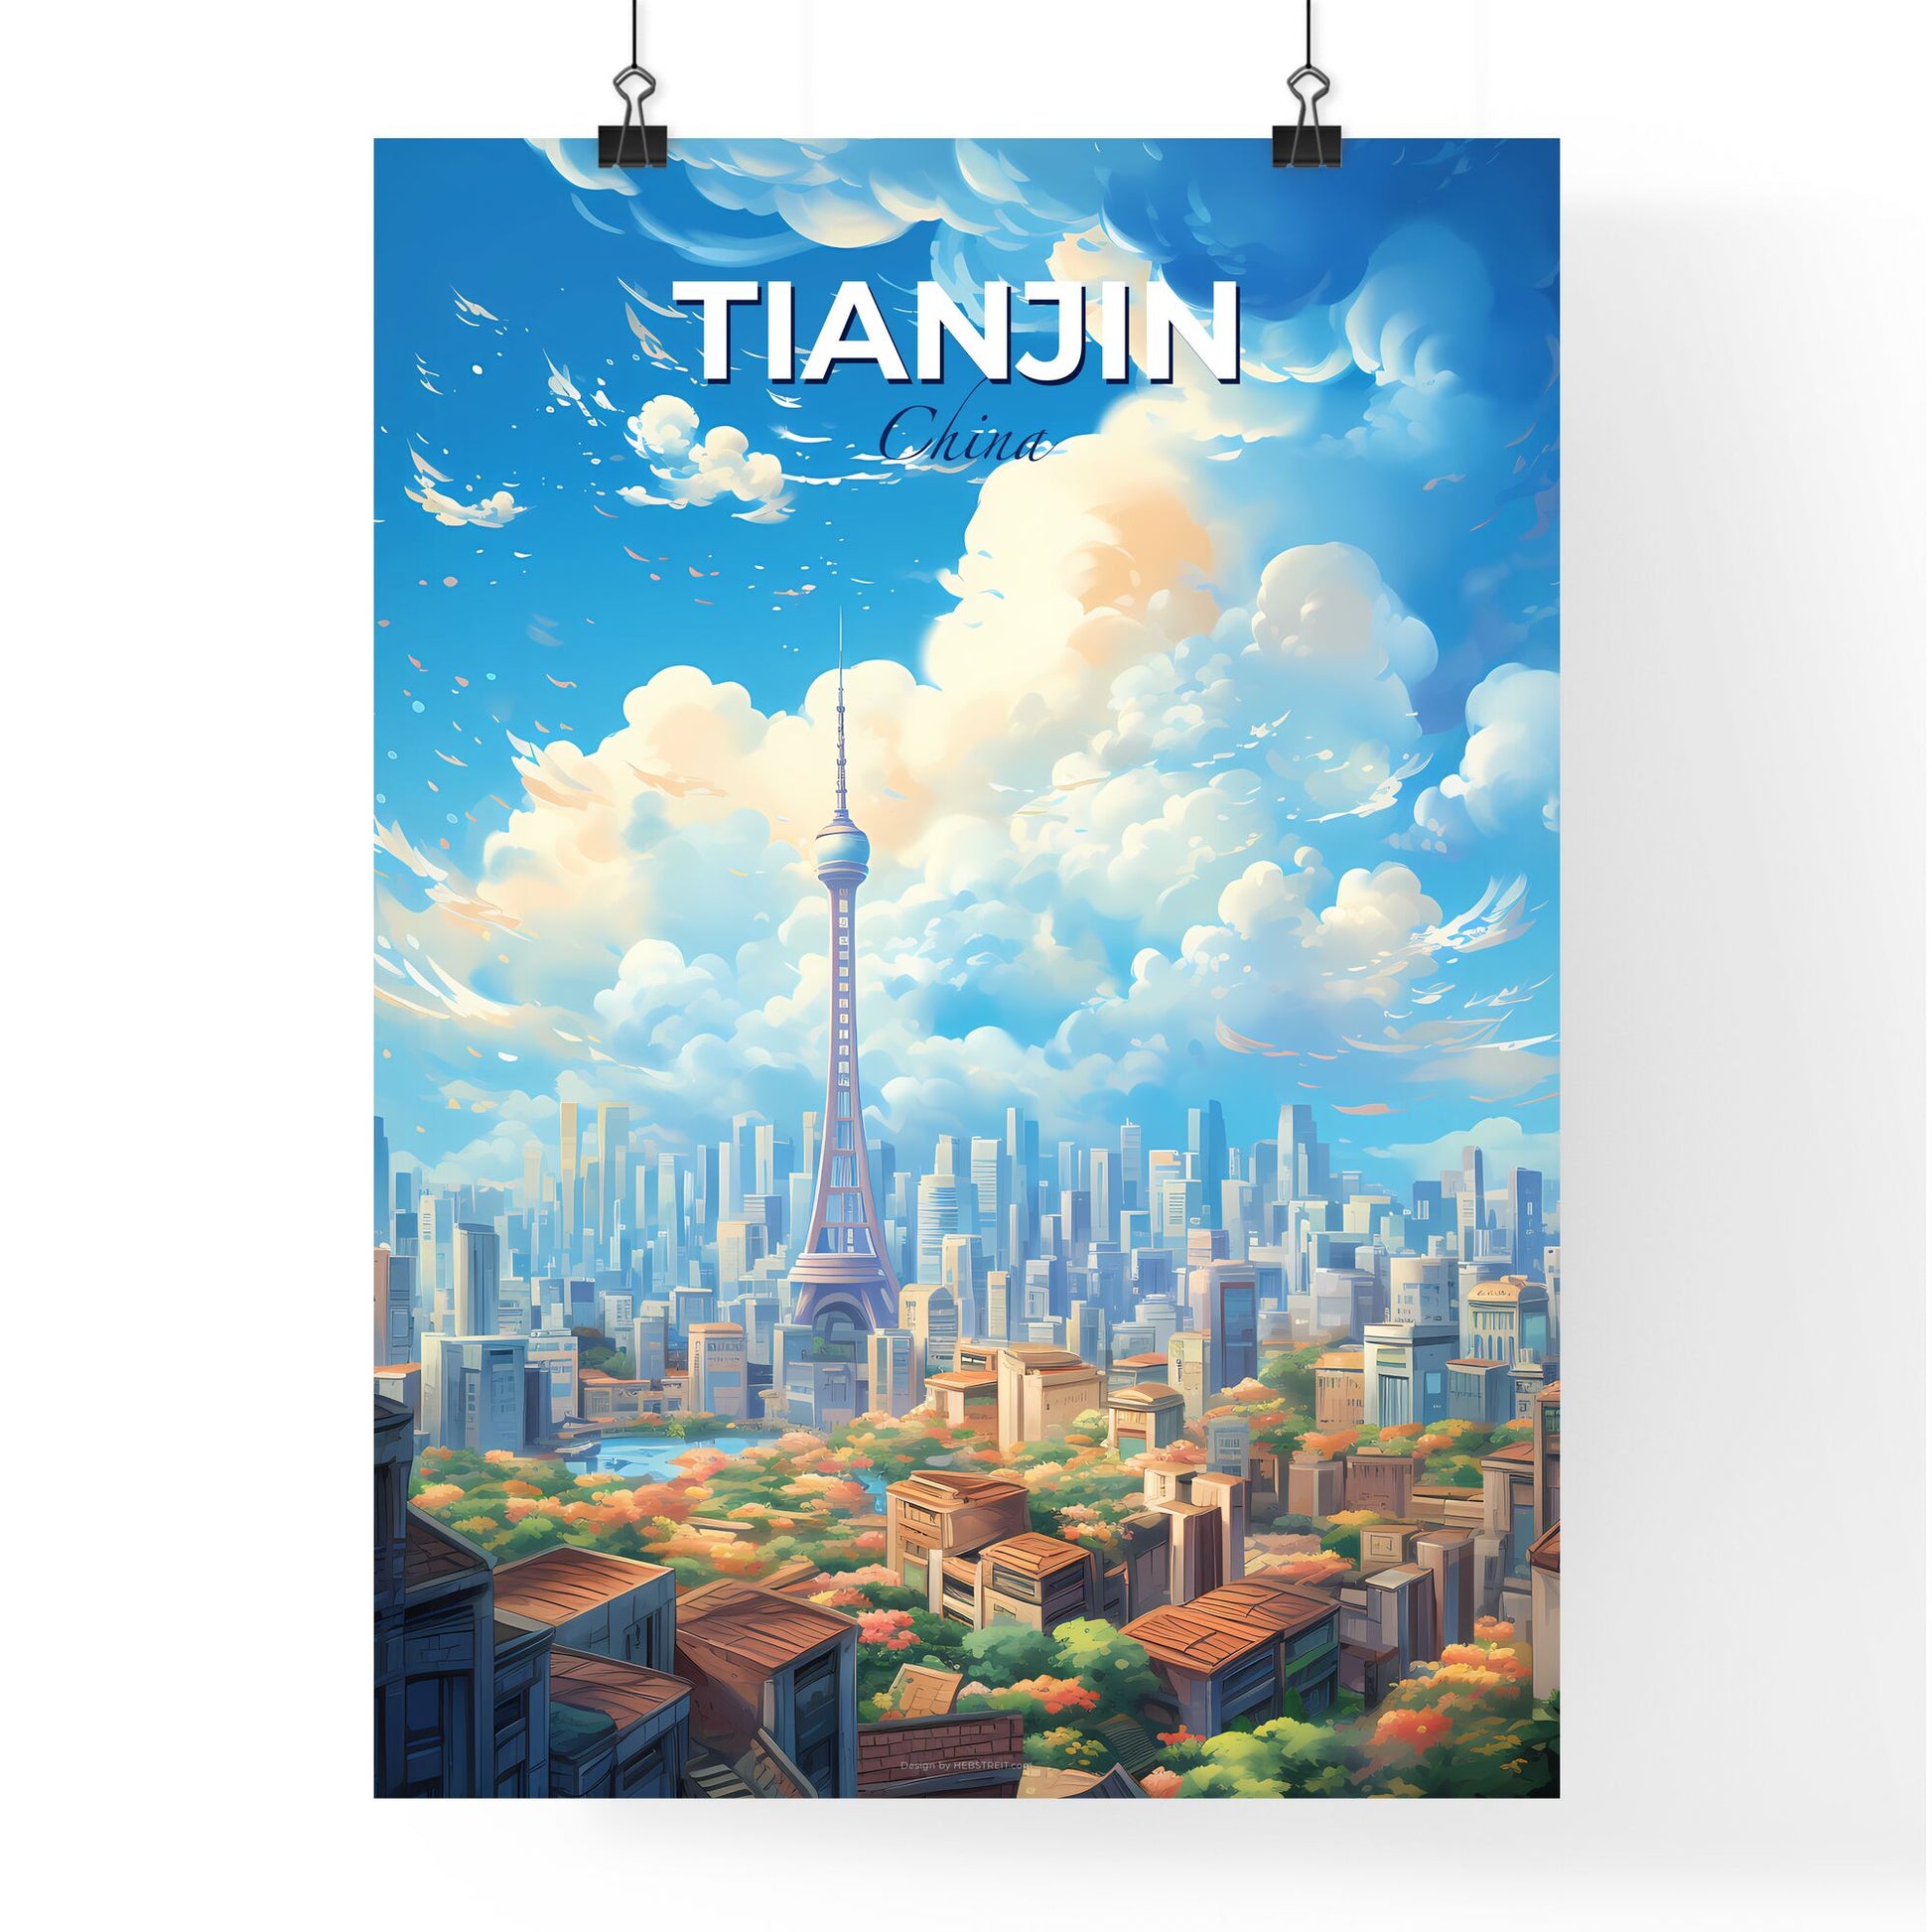 Tianjin China Skyline - A Cityscape With A Tower In The Distance - Customizable Travel Gift Default Title